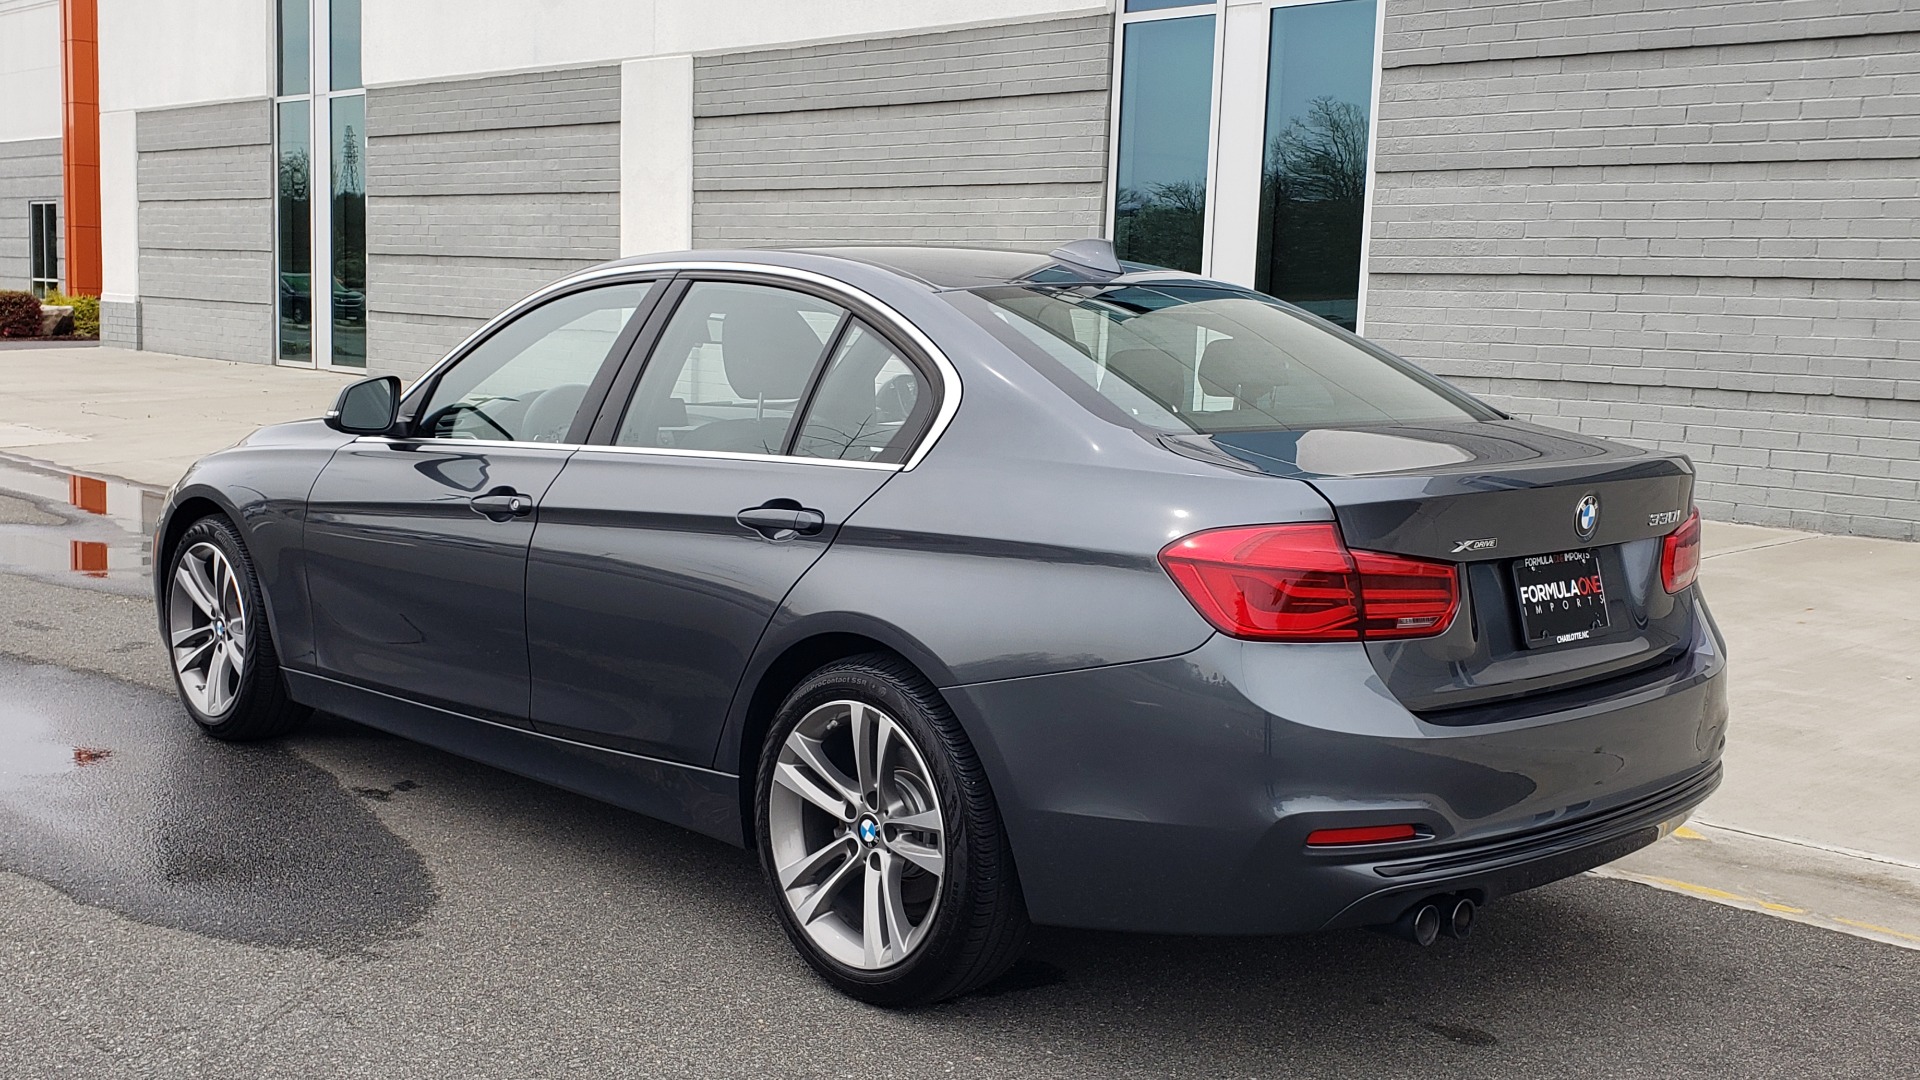 Used 2018 BMW 3 SERIES 330I XDRIVE PREMIUM / CONV PKG NAV / BLIND SPOT / HTD STS / REARVIEW for sale Sold at Formula Imports in Charlotte NC 28227 9